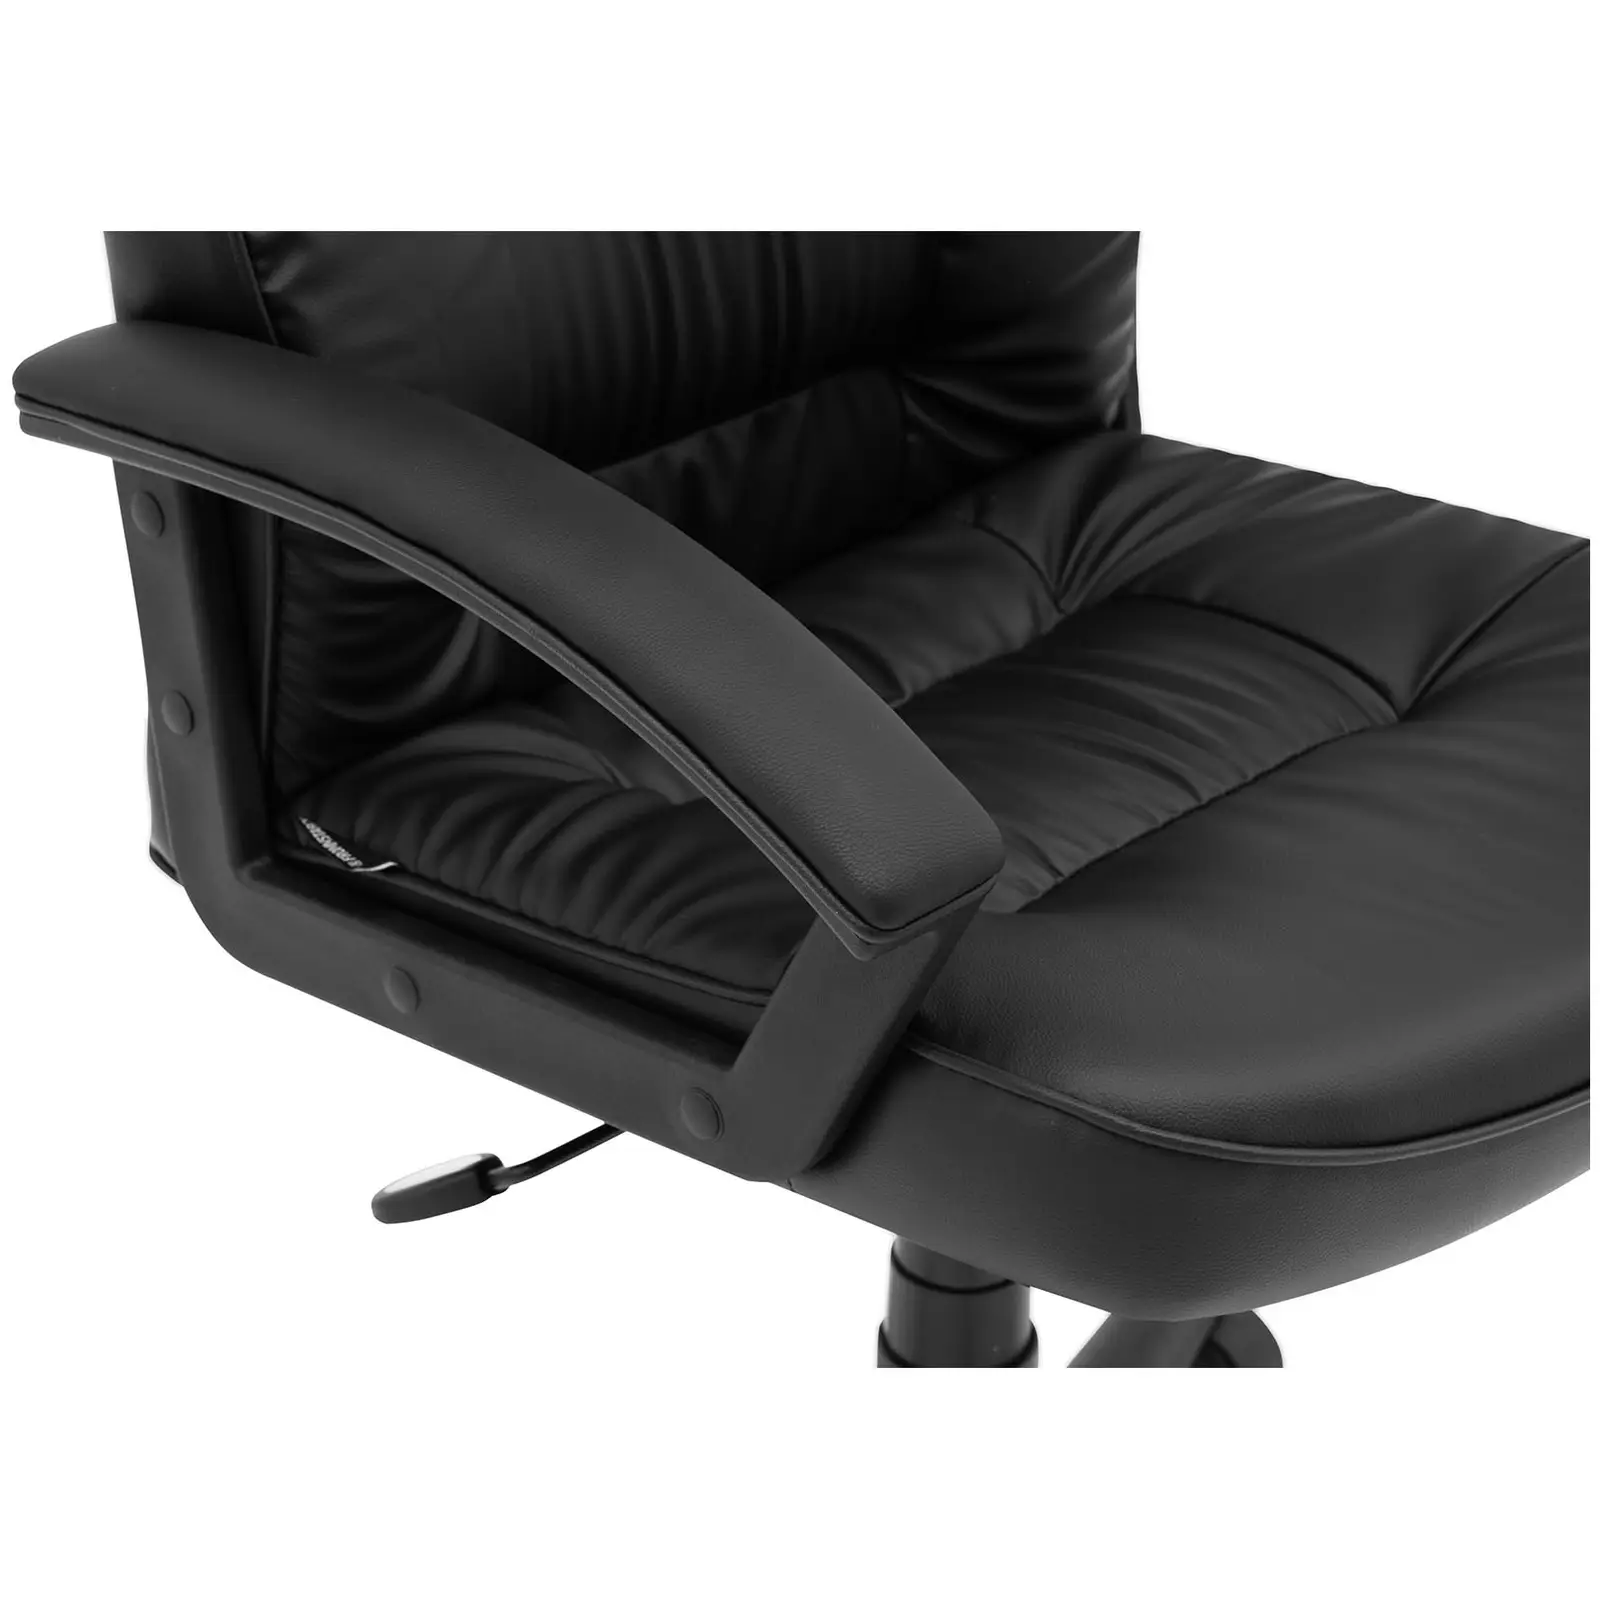 Synthetic Leather Office Chair - backrest - 100 kg - black